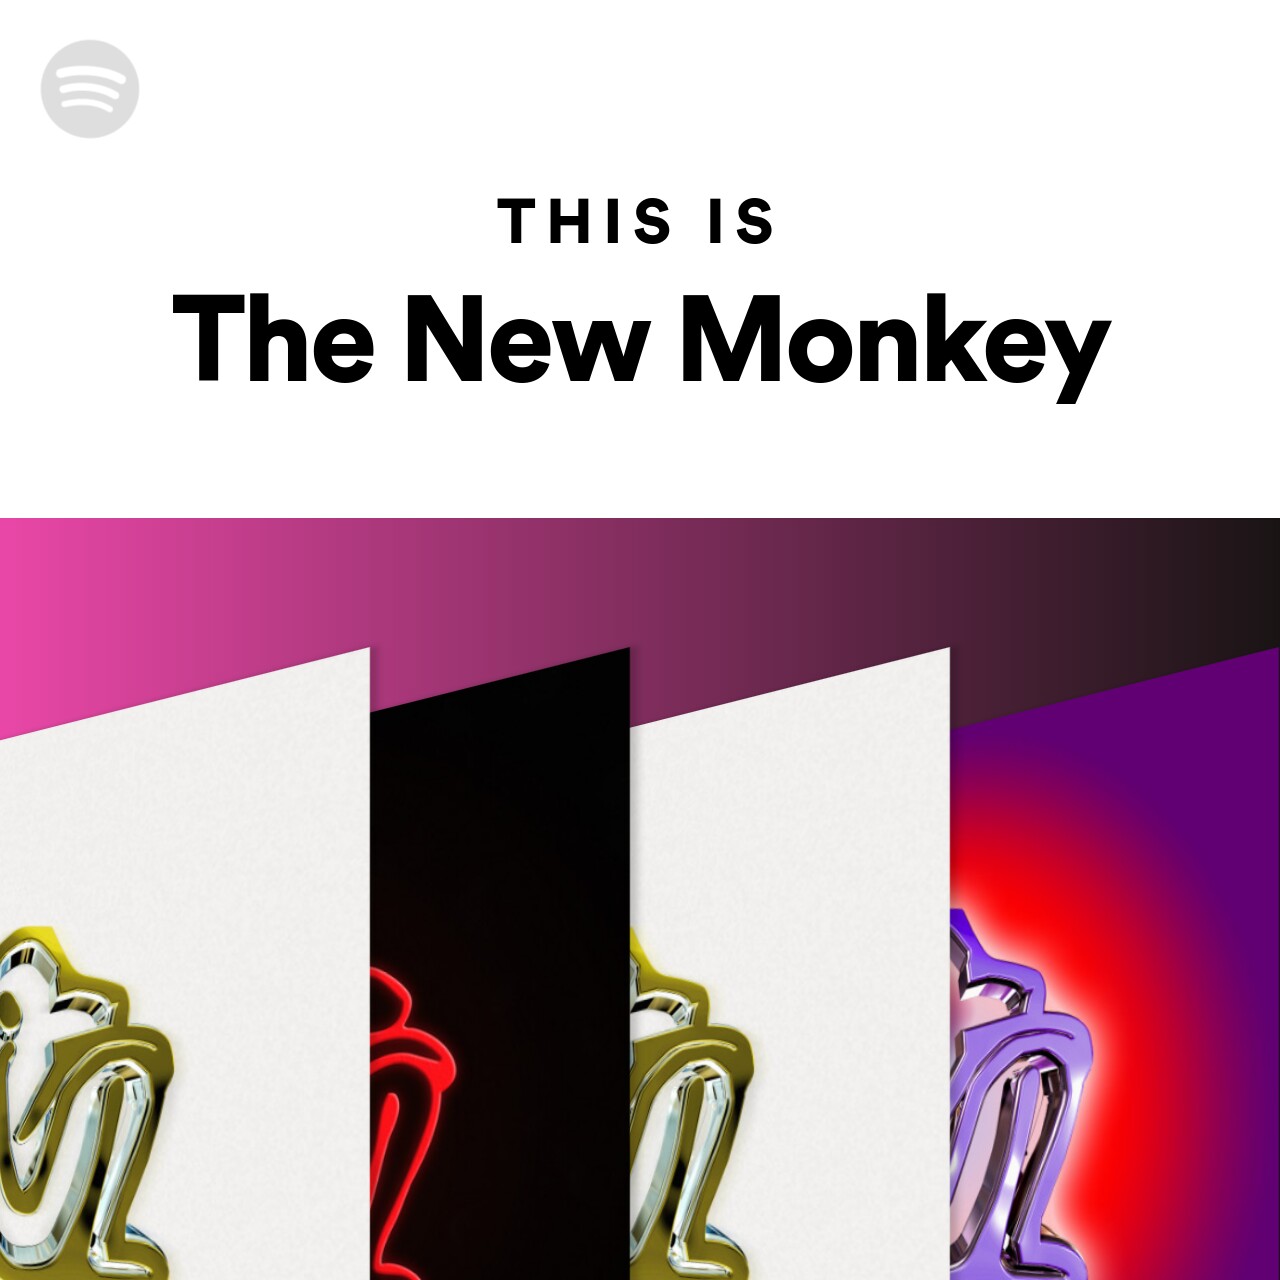 This Is The New Monkey